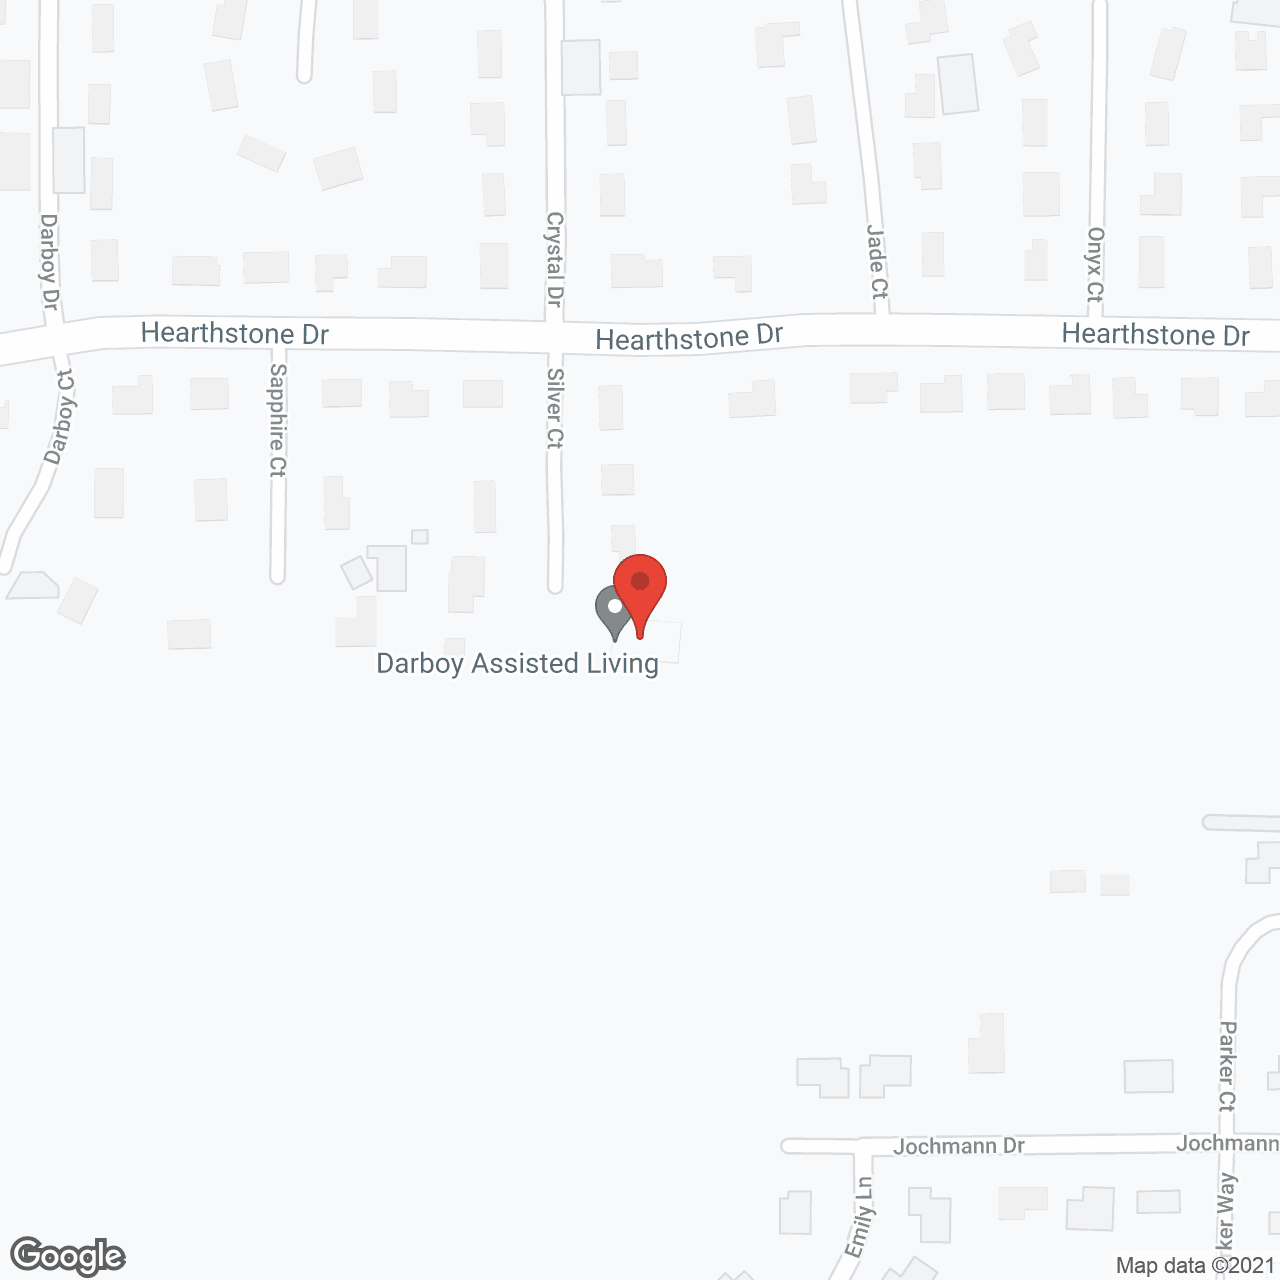 Darboy Assisted Living in google map